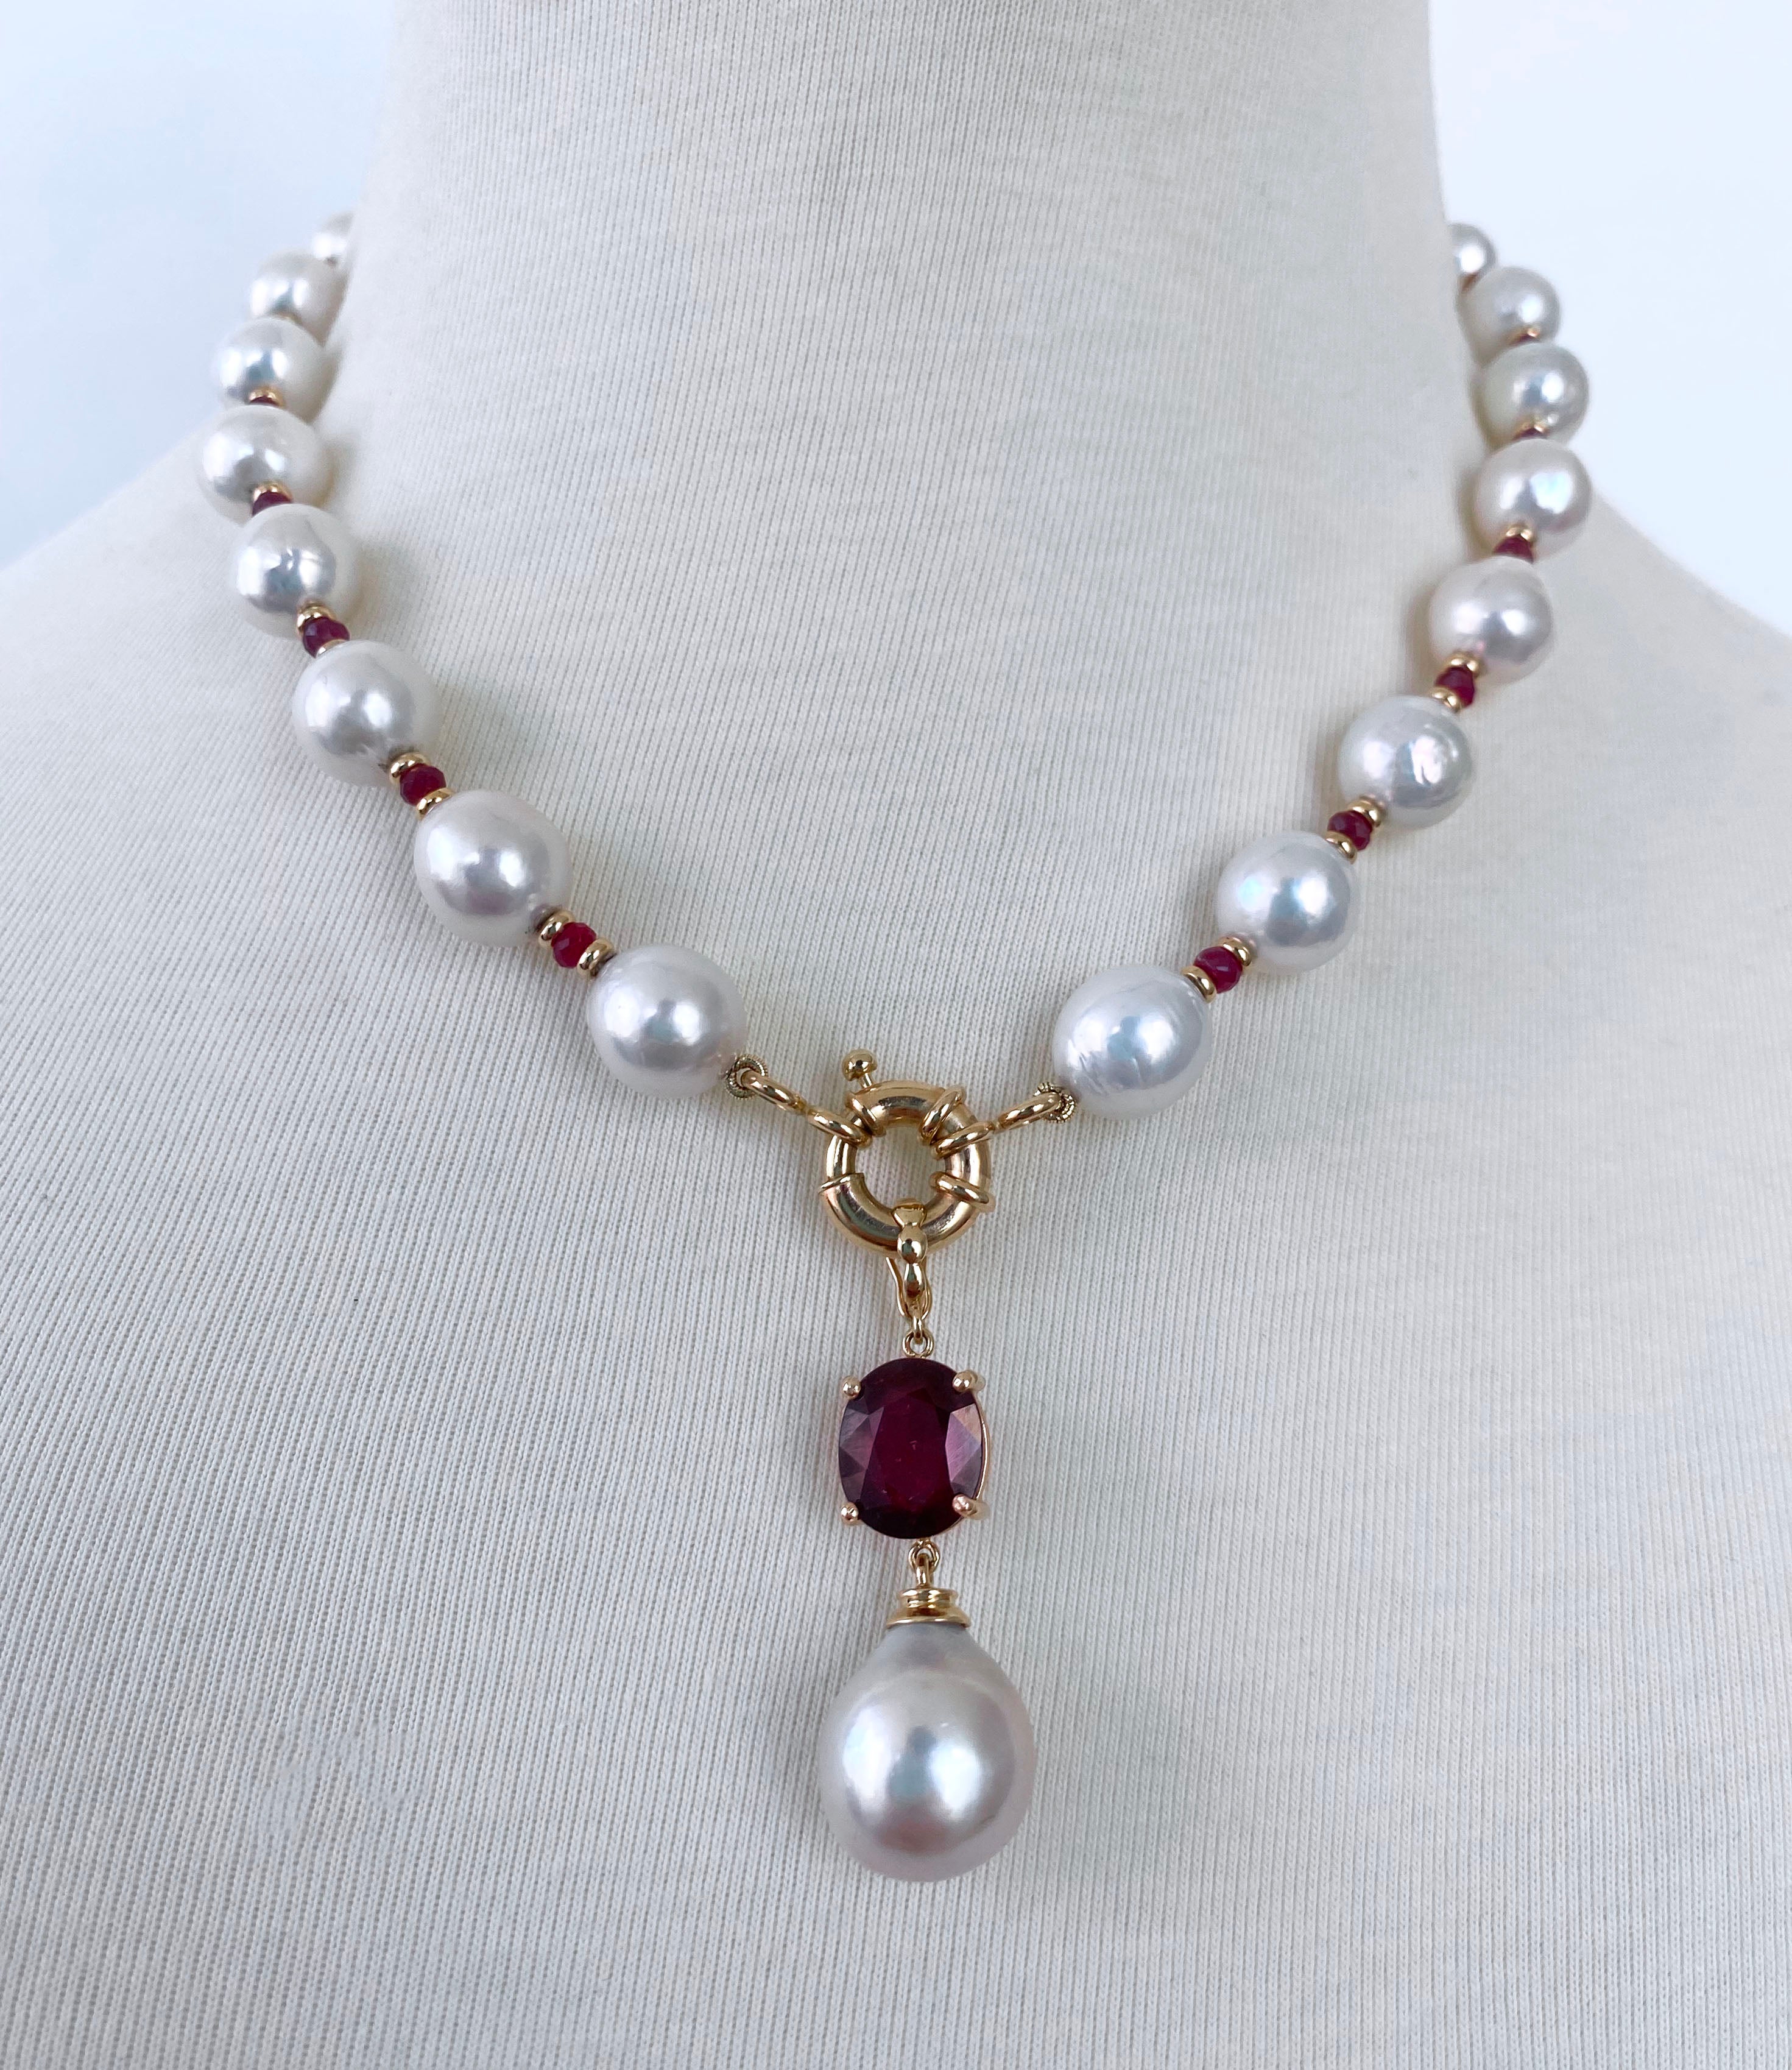 Gorgeous Ruby and Pearl Necklace from Marina J.

This piece is made with all Baroque Pearls, Rubies & solid 14k Yellow Gold Findings. The Baroque Pearls display a magnificent iridescence giving a multi color luster. Solid 14k Yellow Gold findings